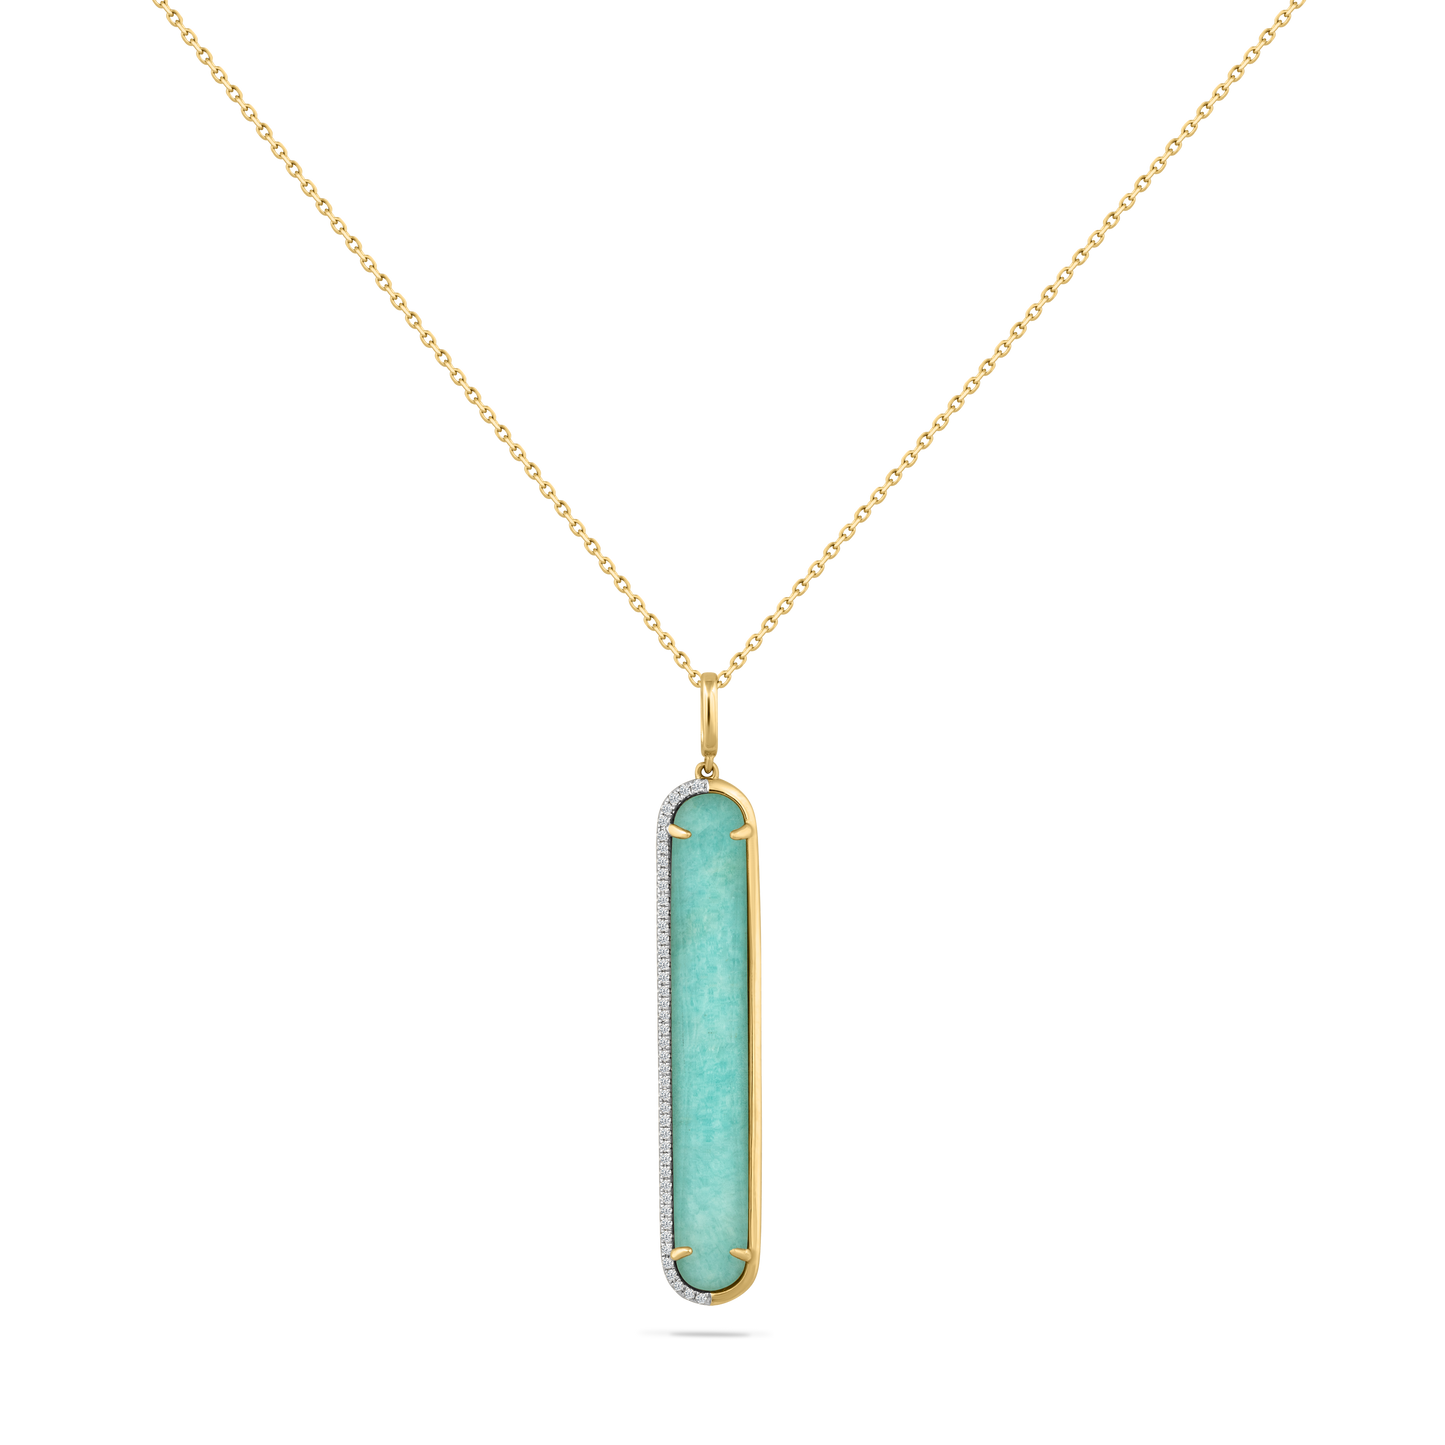 14K 39MM DOUBLET AMAZONITE & CLEAR QUARTZ PENDANT WITH 43 DIAMONDS 0.16CT ON 1.5G 18 INCHES CABLE CHAIN